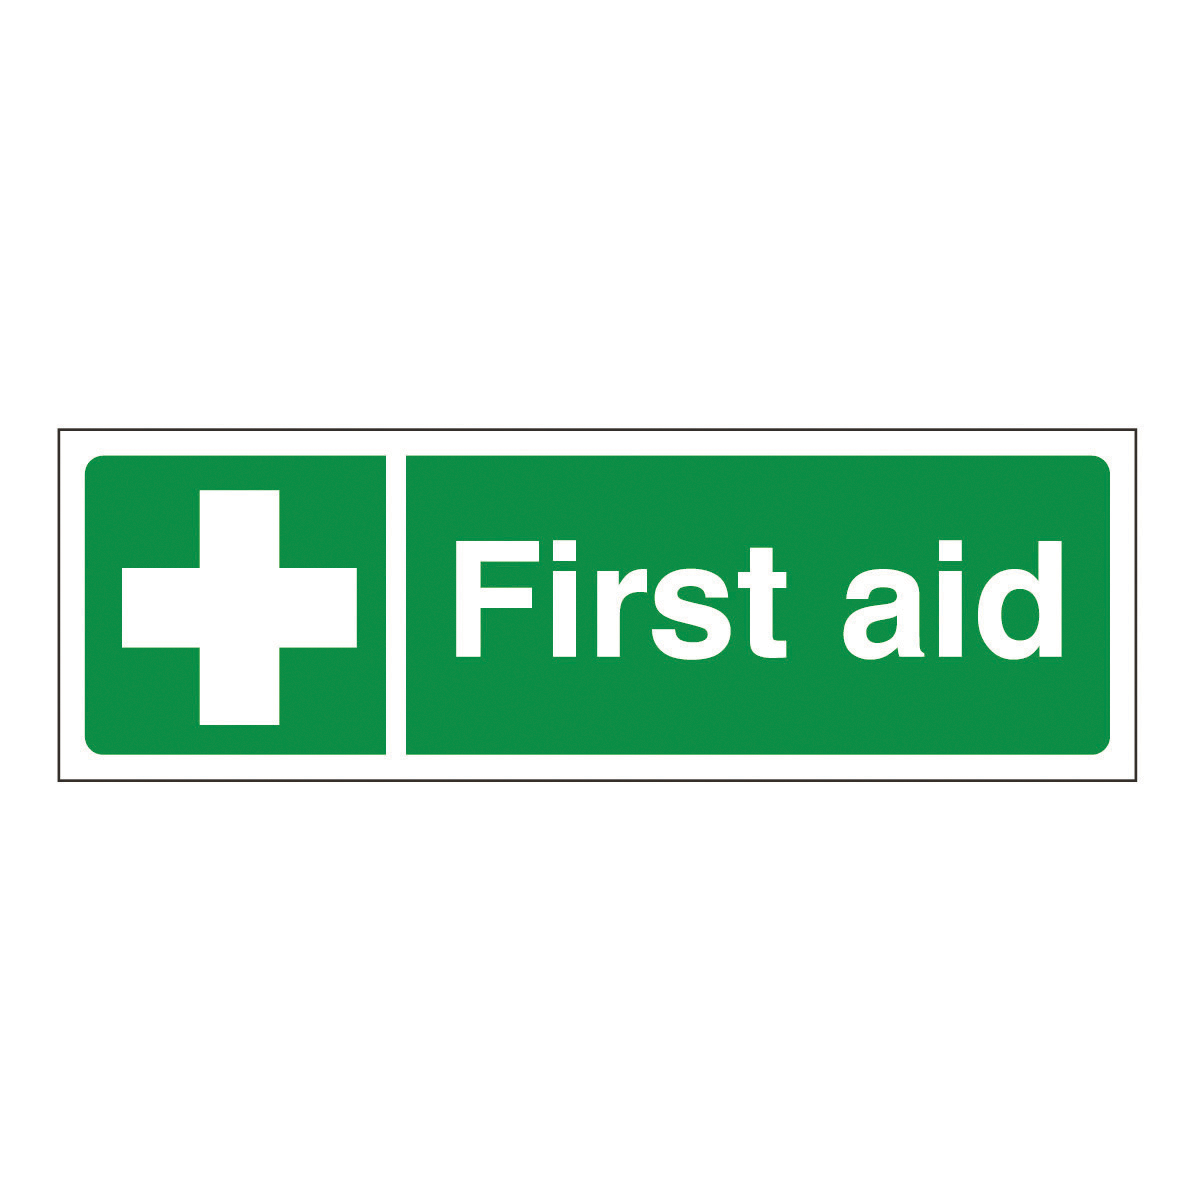 First Aid safety signs